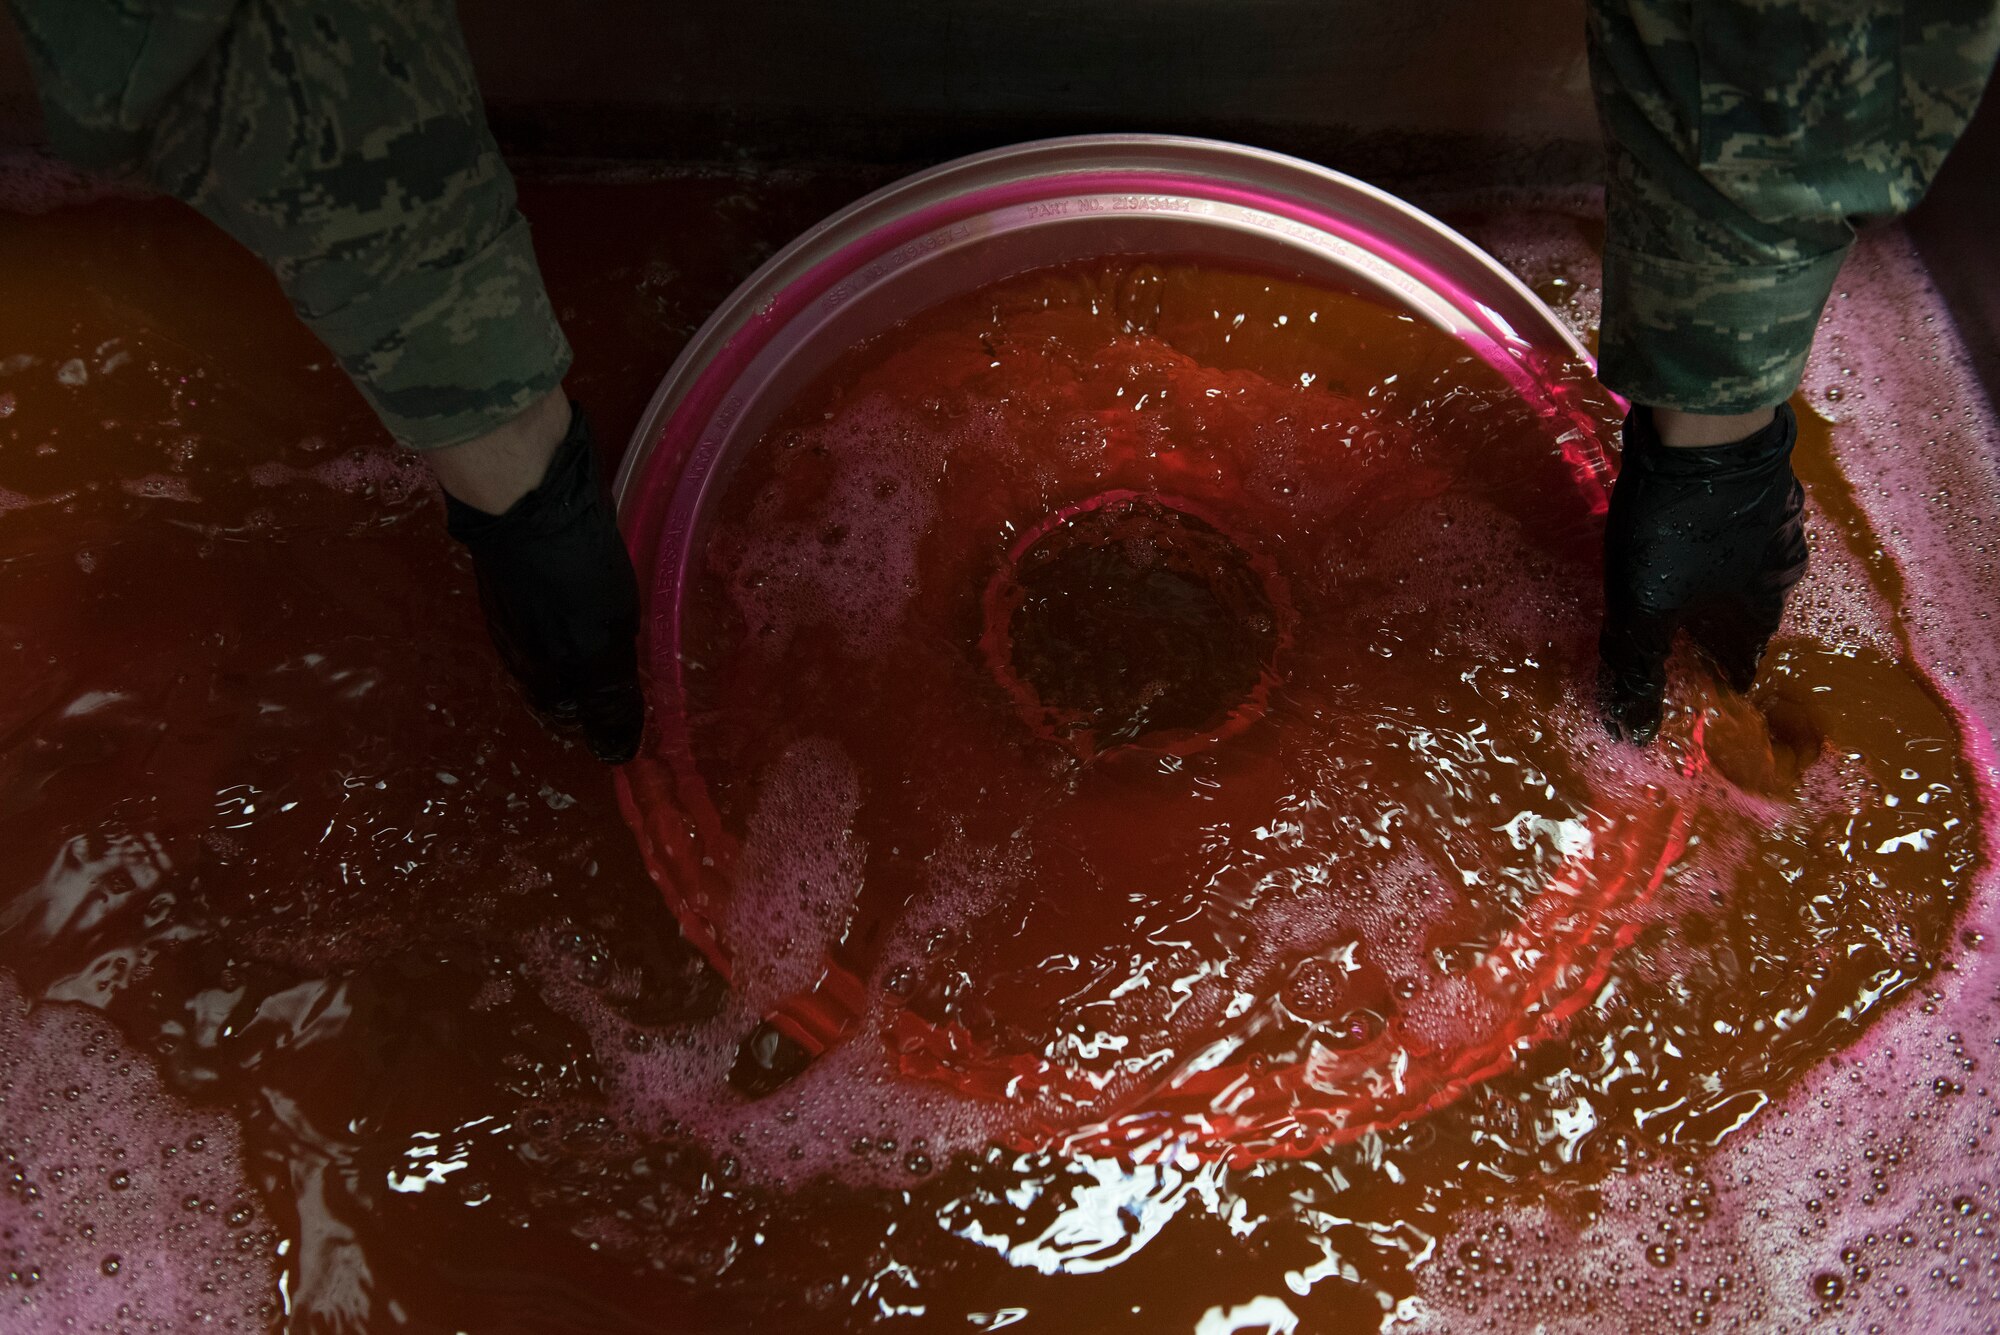 An aircraft wheel is dipped into red liquid.